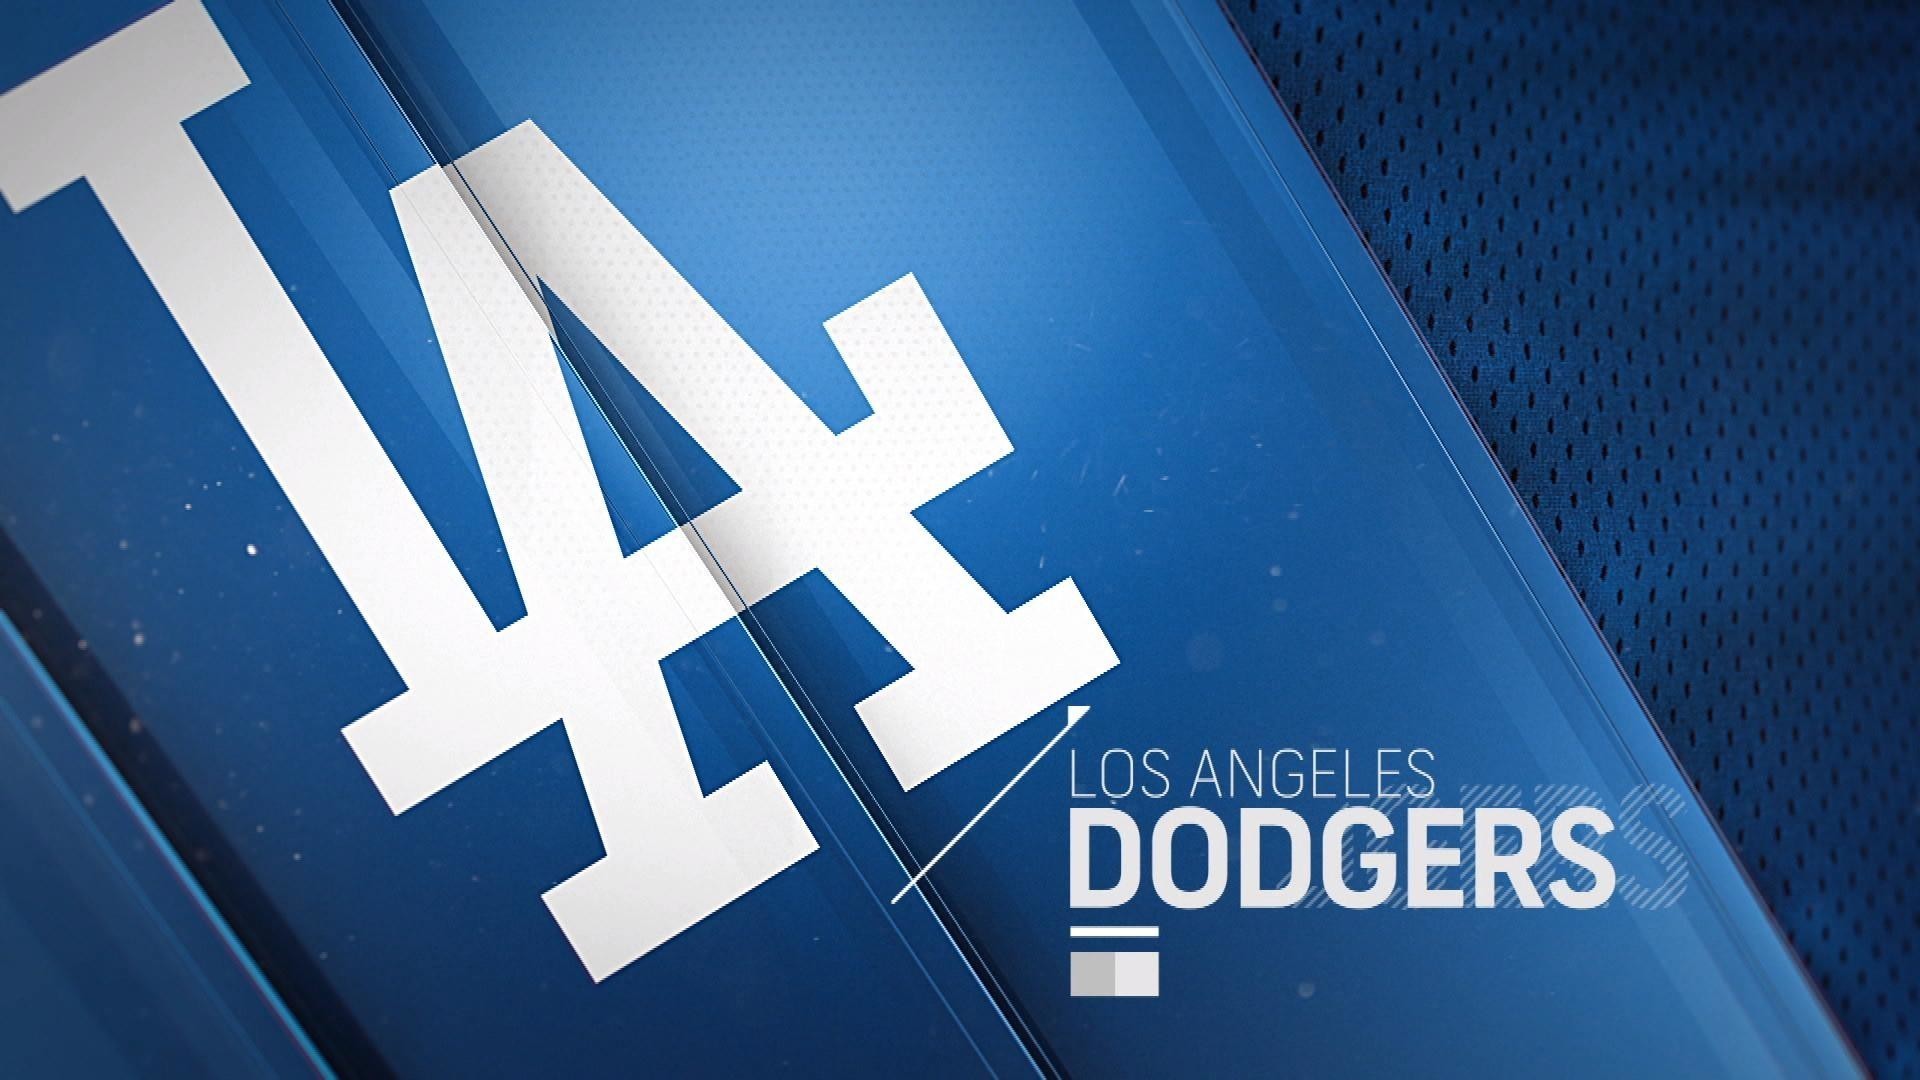 HD Backgrounds Los Angeles Dodgers with high-resolution 1920x1080 pixel. You can use this wallpaper for Mac Desktop Wallpaper, Laptop Screensavers, Android Wallpapers, Tablet or iPhone Home Screen and another mobile phone device